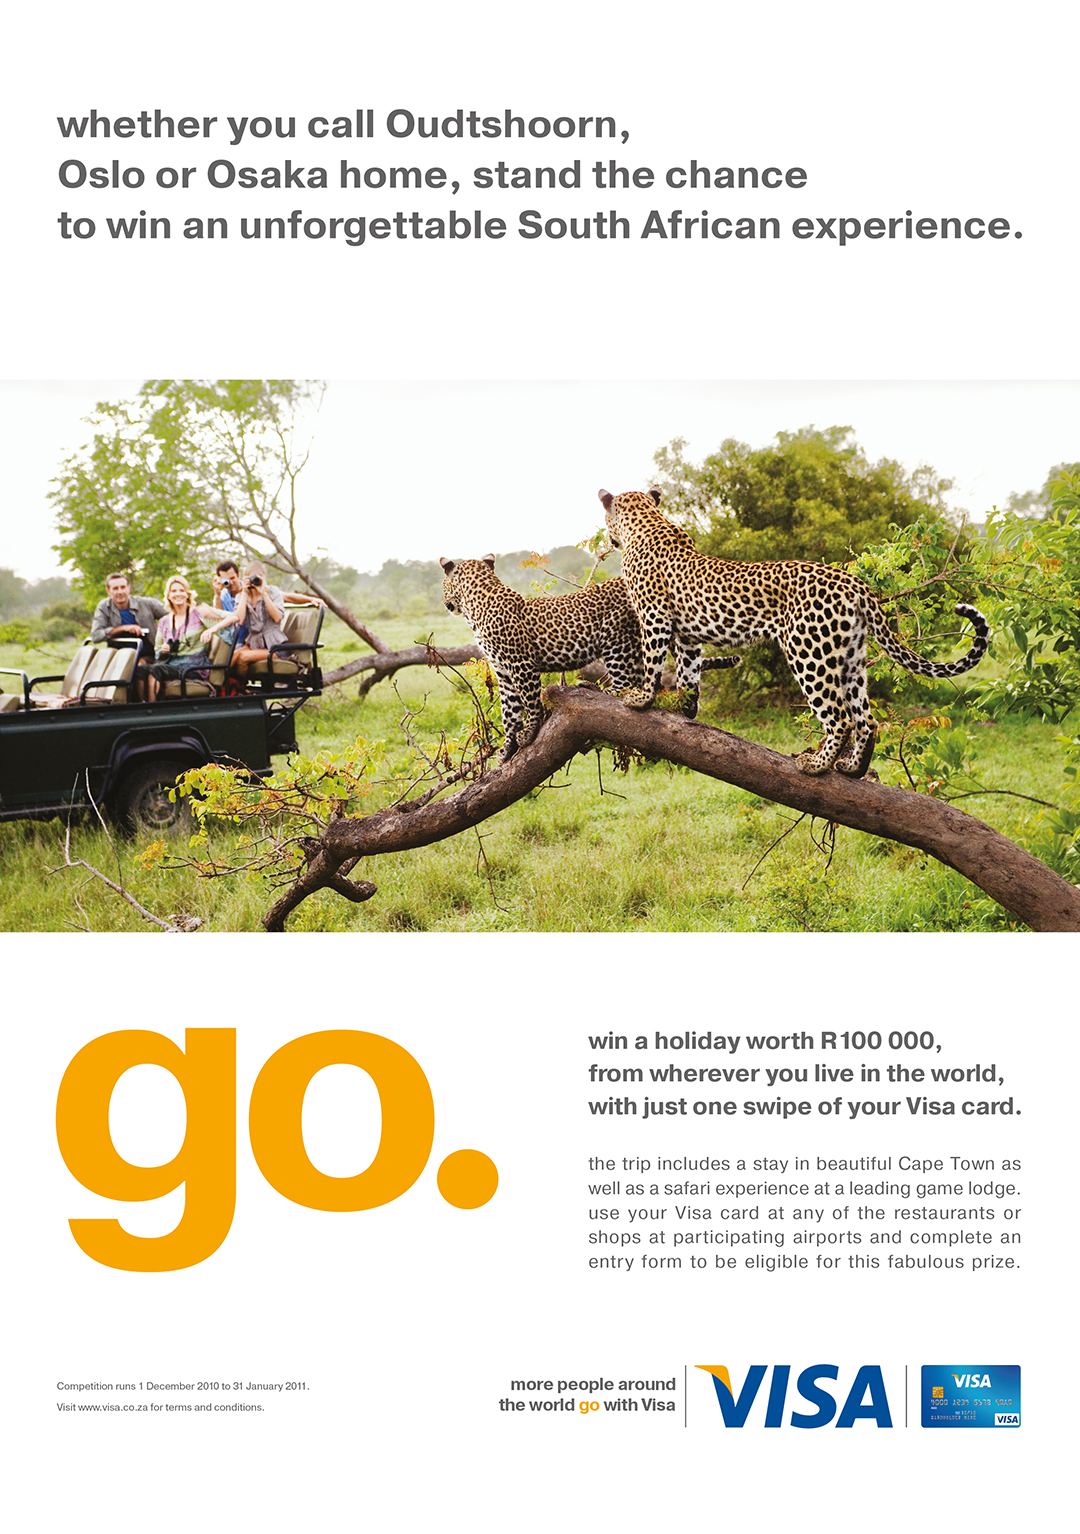 Visa competition: poster to win a trip within South Africa, image of leopards